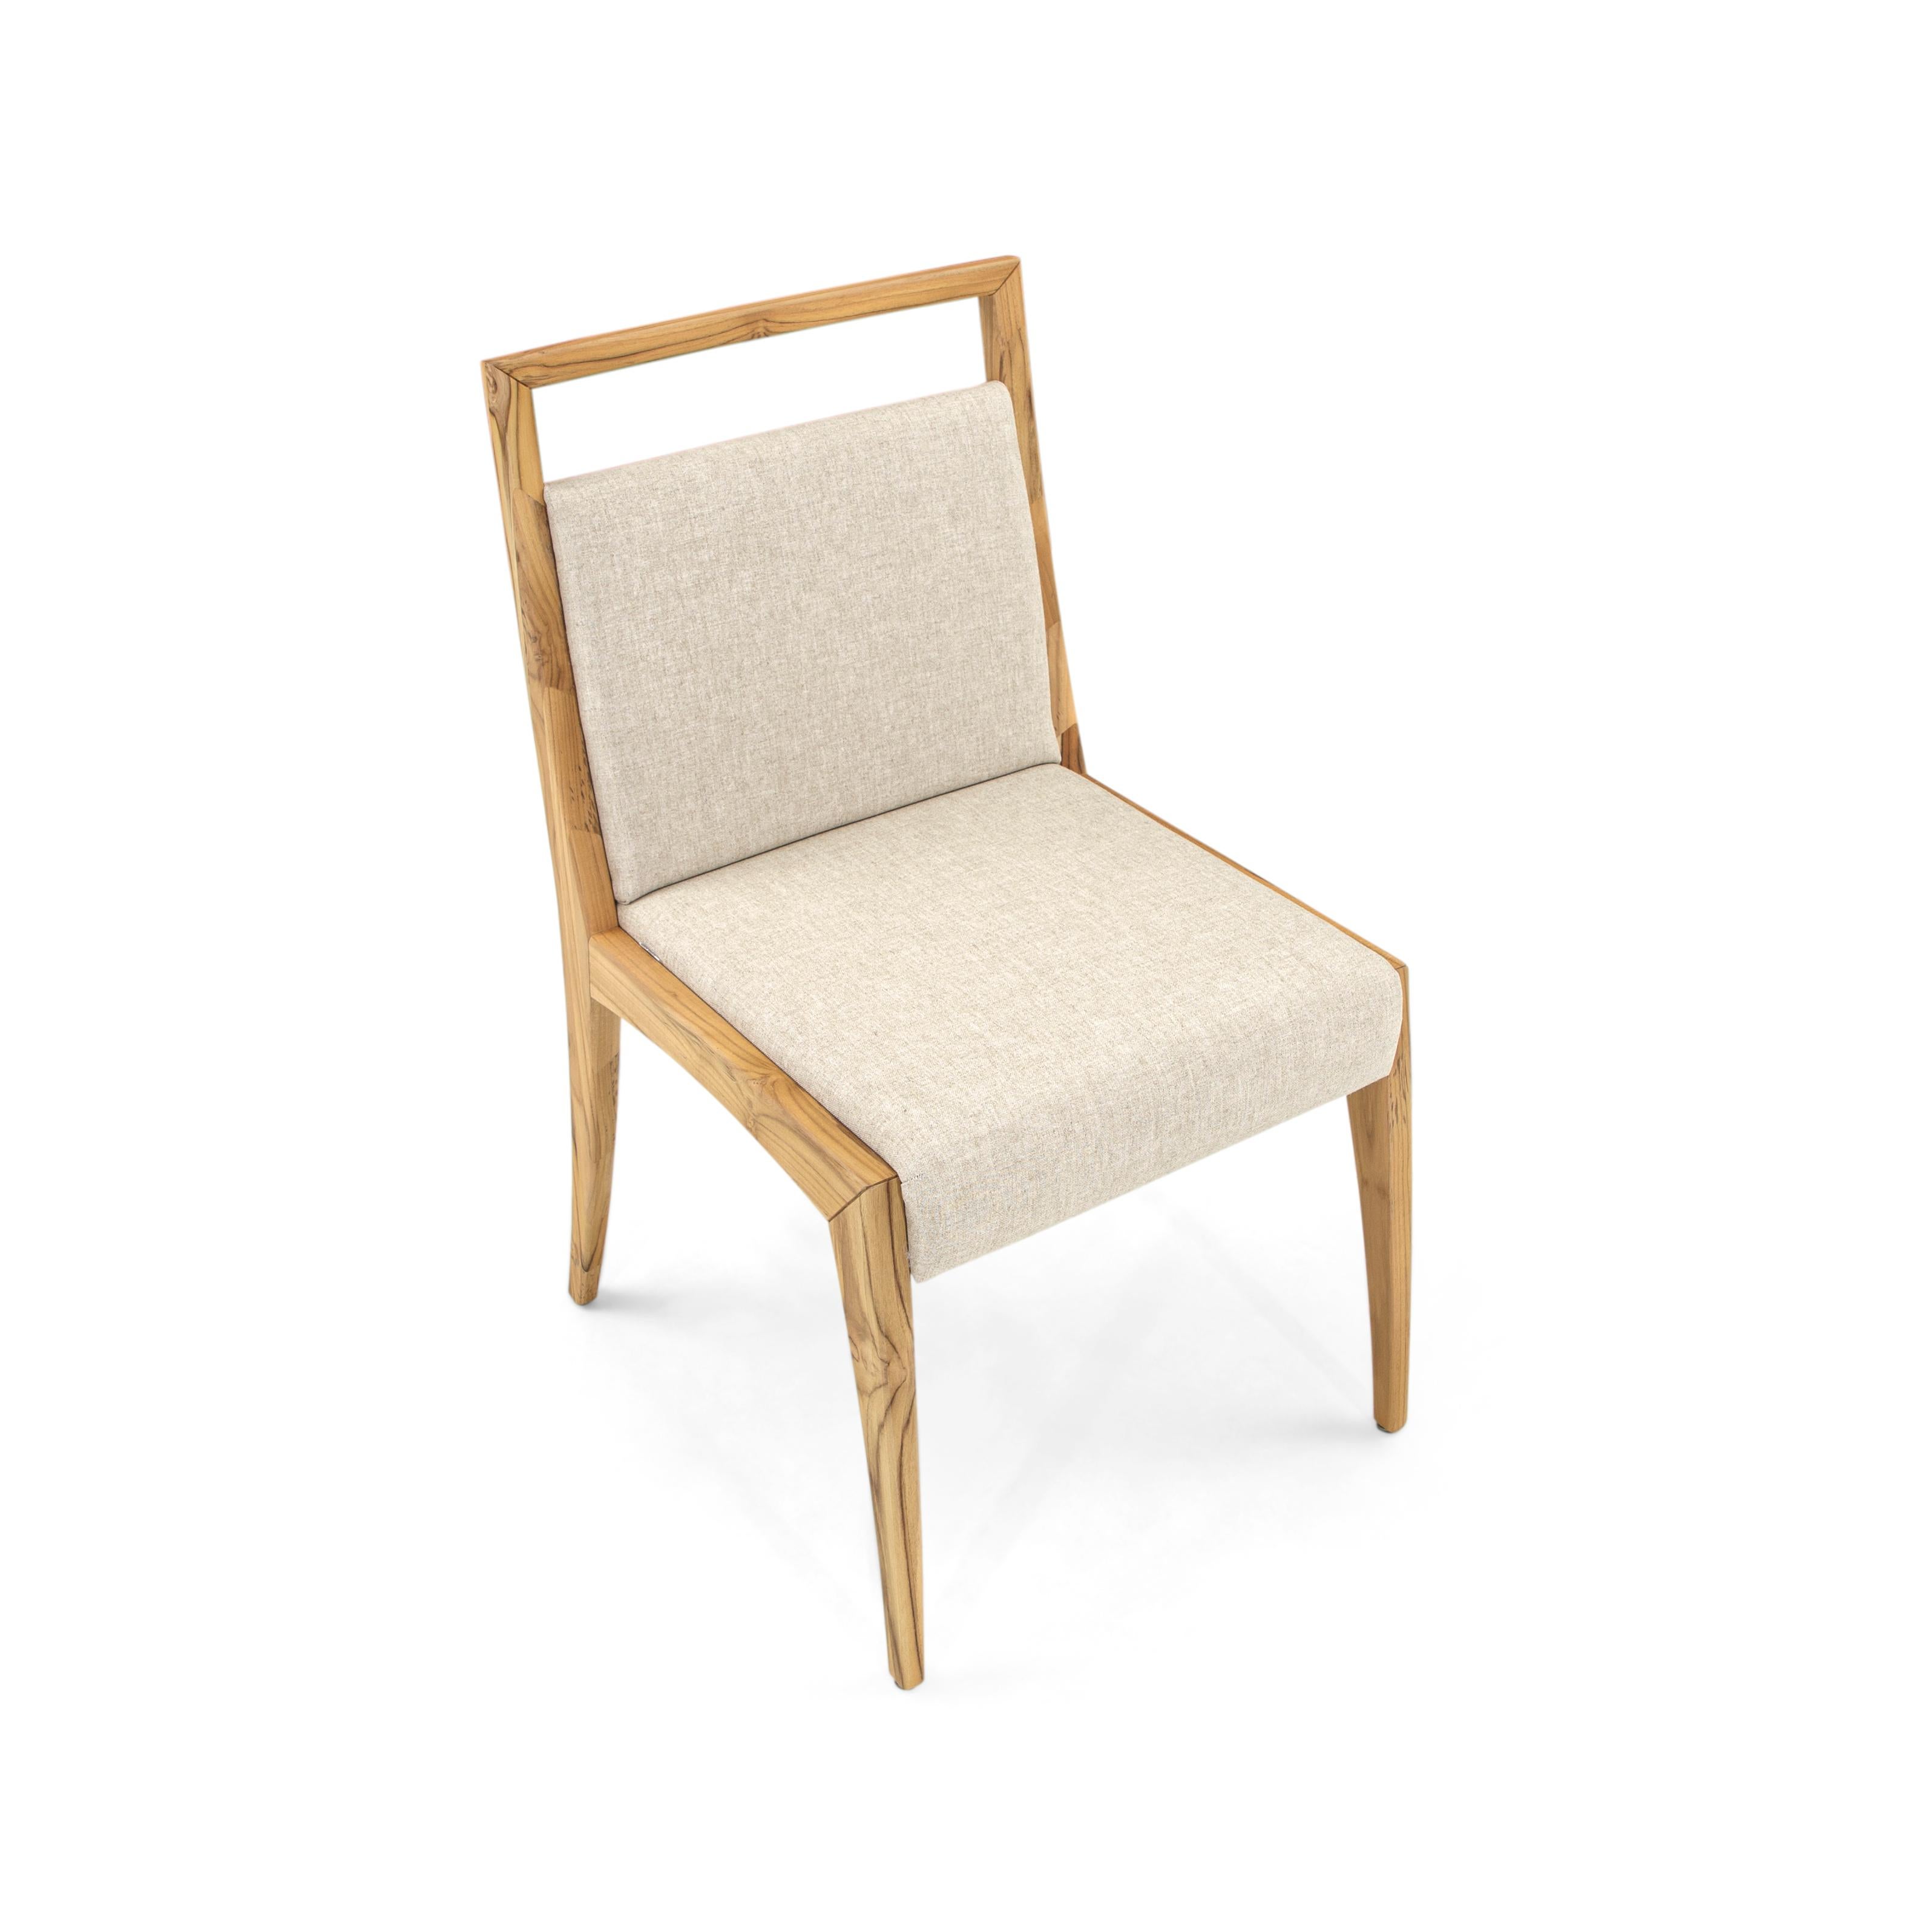 Upholstery Sotto Dining Chair with a Teak Wood Finish and Beige Fabric, set of 2 For Sale